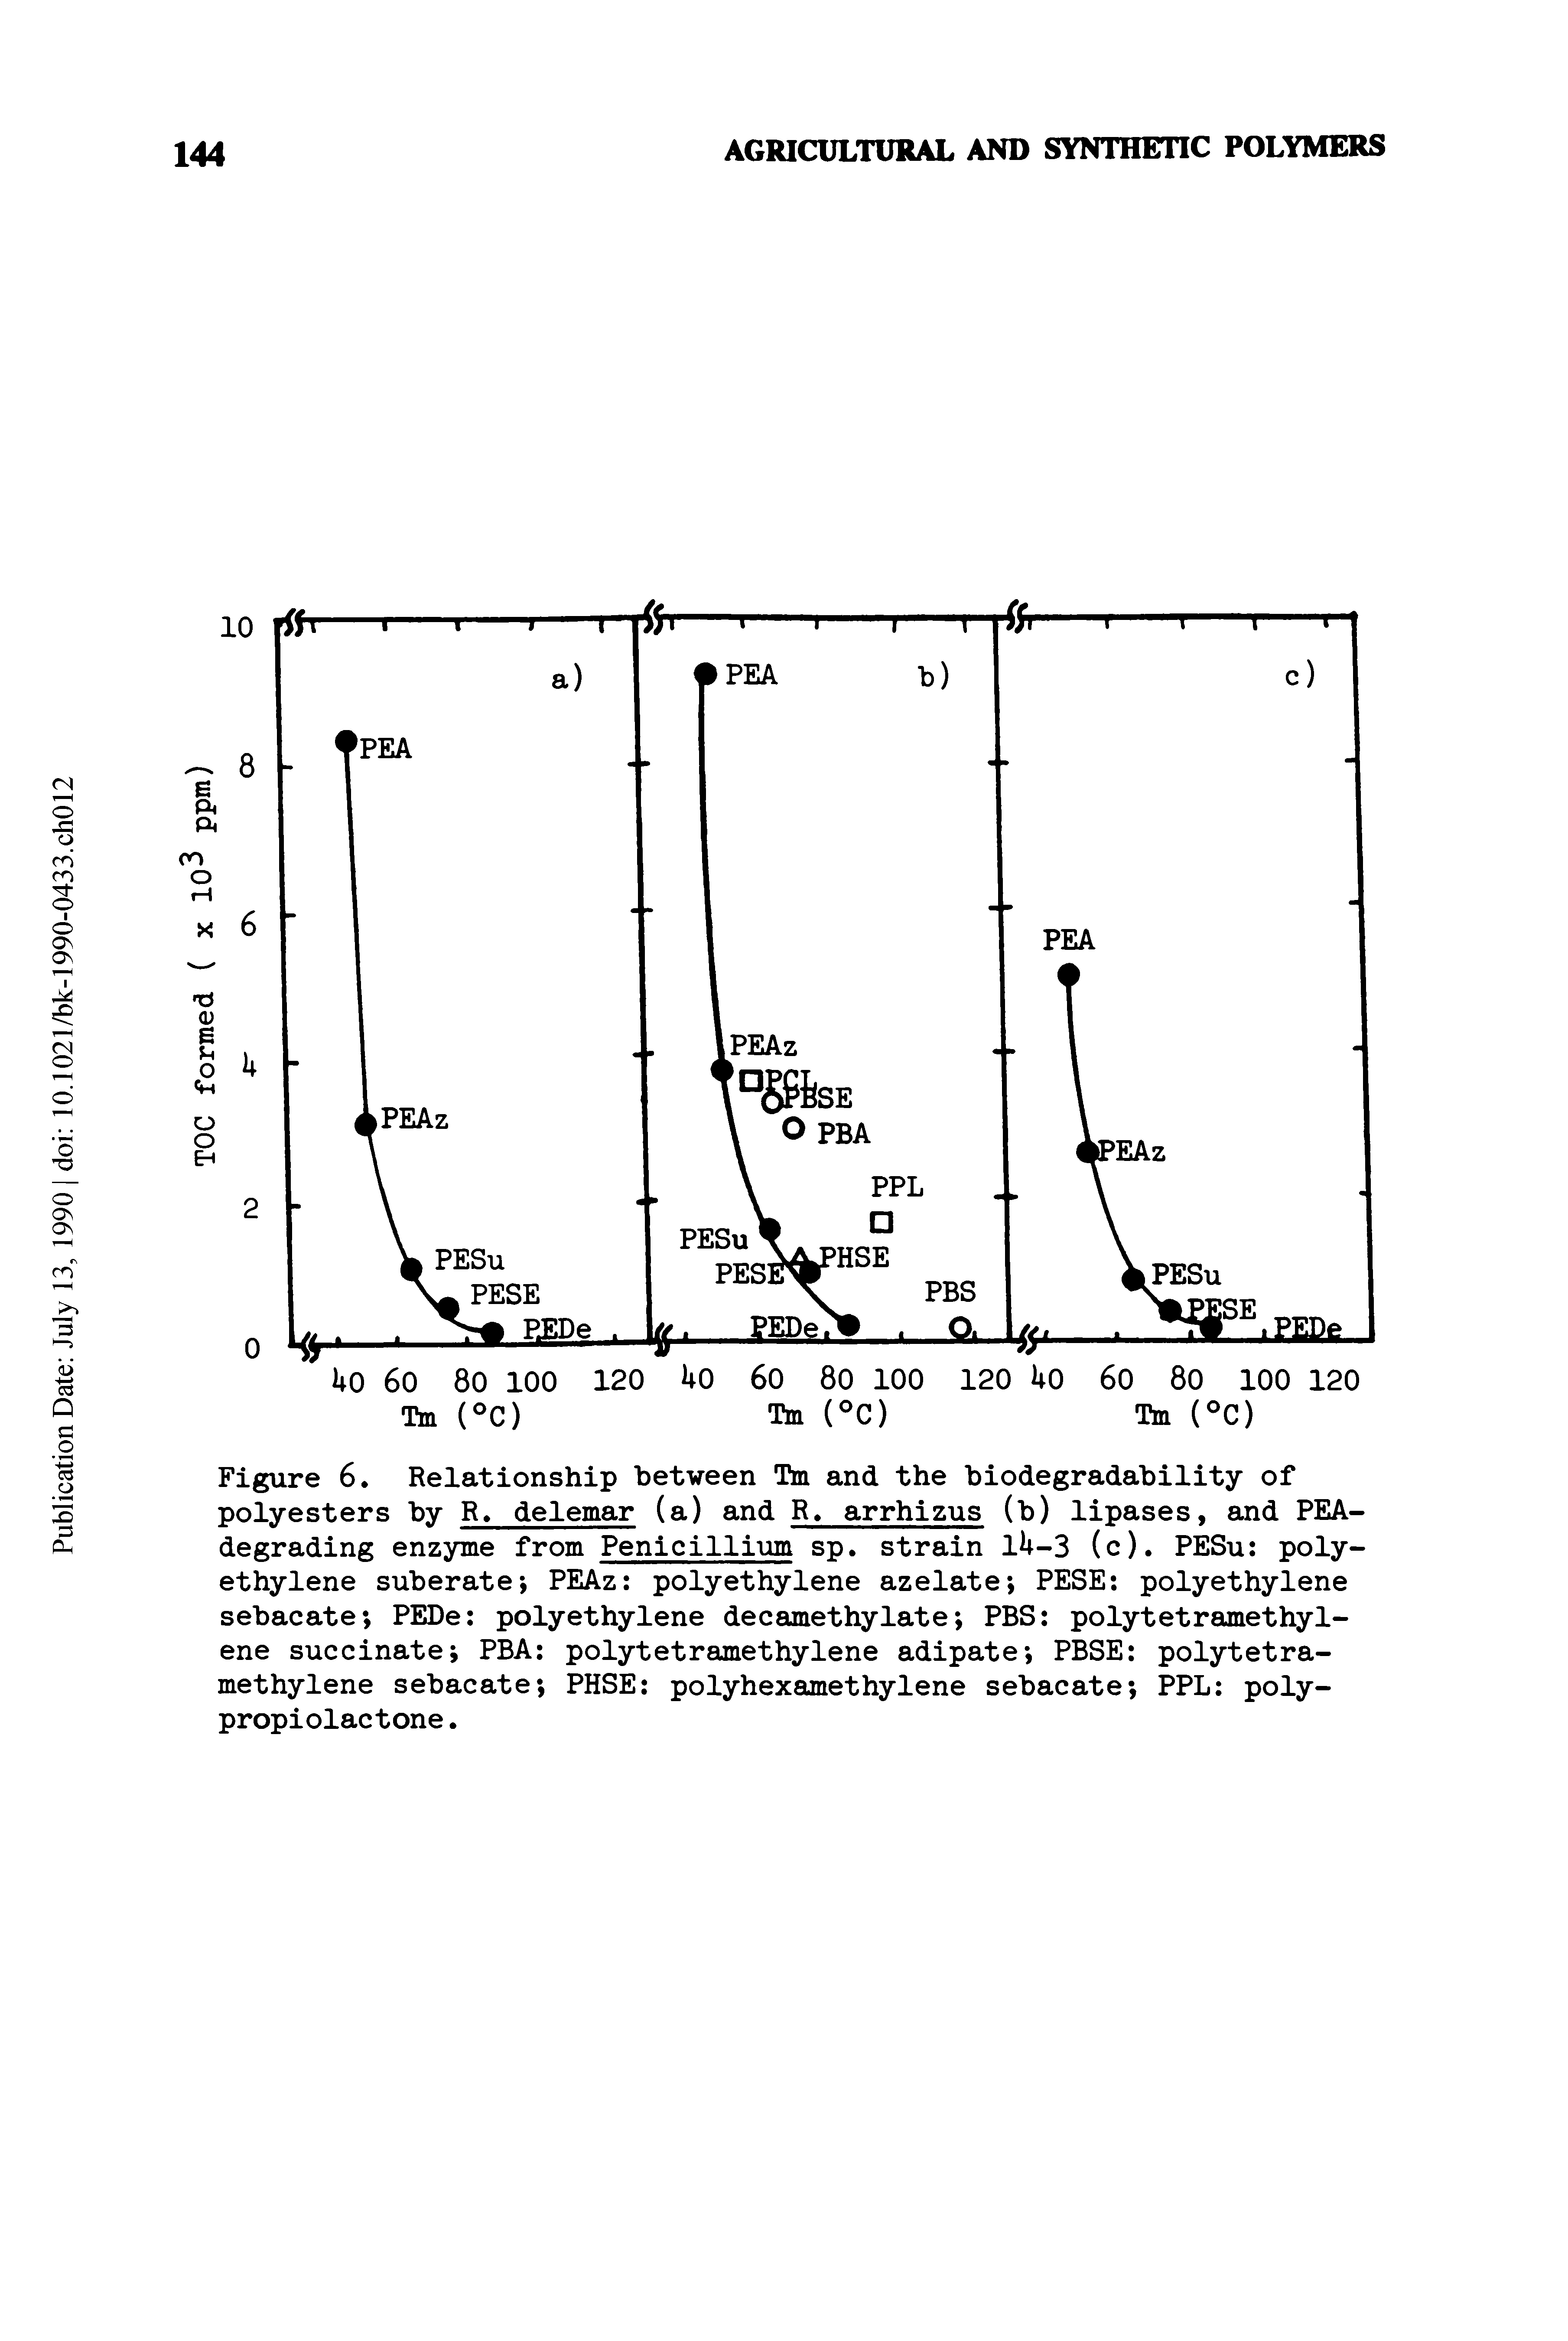 Figure 6. Relationship between Tm and the biodegradability of polyesters by R> delemar (a) and R> arrhizus (b) lipases, and PEA-degrading enzyme from Penicillium sp. strain ll+-3 (c). PESu polyethylene suberate PEAz polyethylene azelate PESE polyethylene sebacate PEDe polyethylene decamethylate PBS polytetramethyl-ene succinate PBA polytetramethylene adipate PBSE polytetra-methylene sebacate PHSE polyhexamethylene sebacate PPL poly-propiolactone.